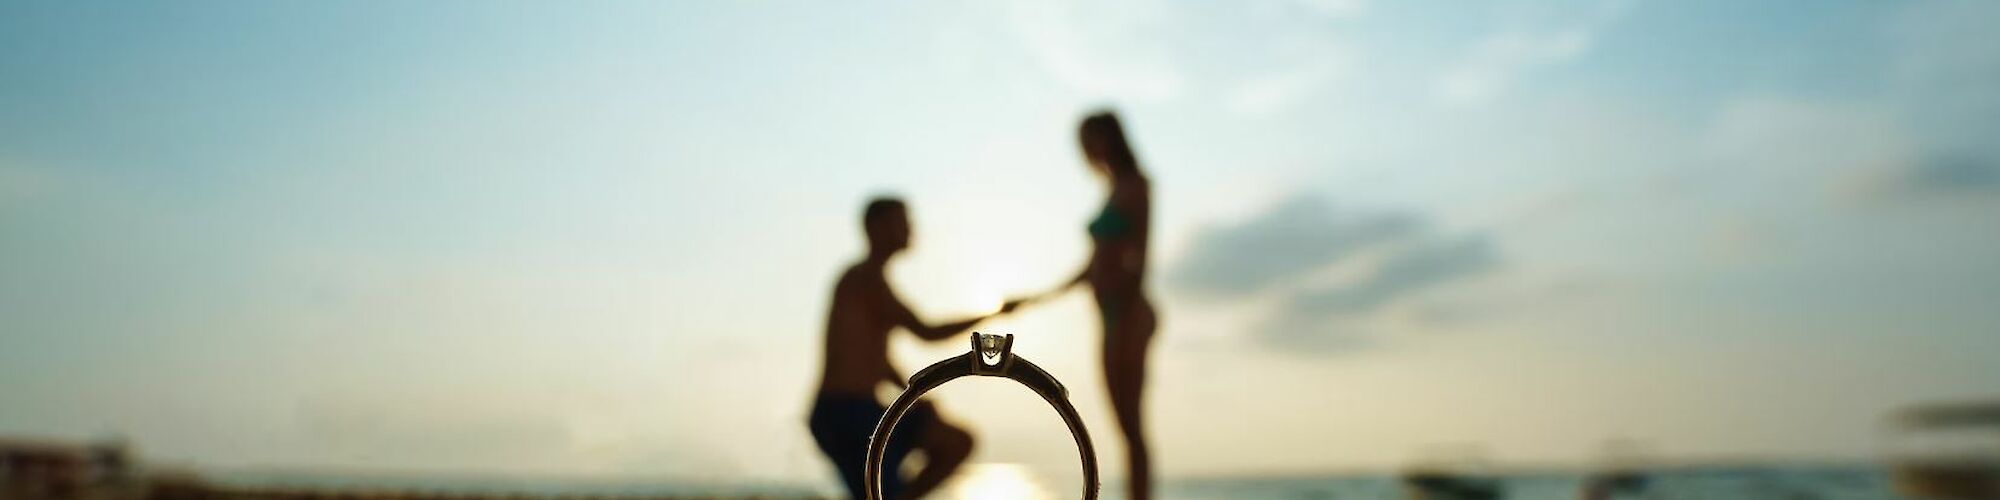 A ring is in focus on sandy beach, with a silhouetted couple in the background, one kneeling, likely proposing, during a beach sunset.